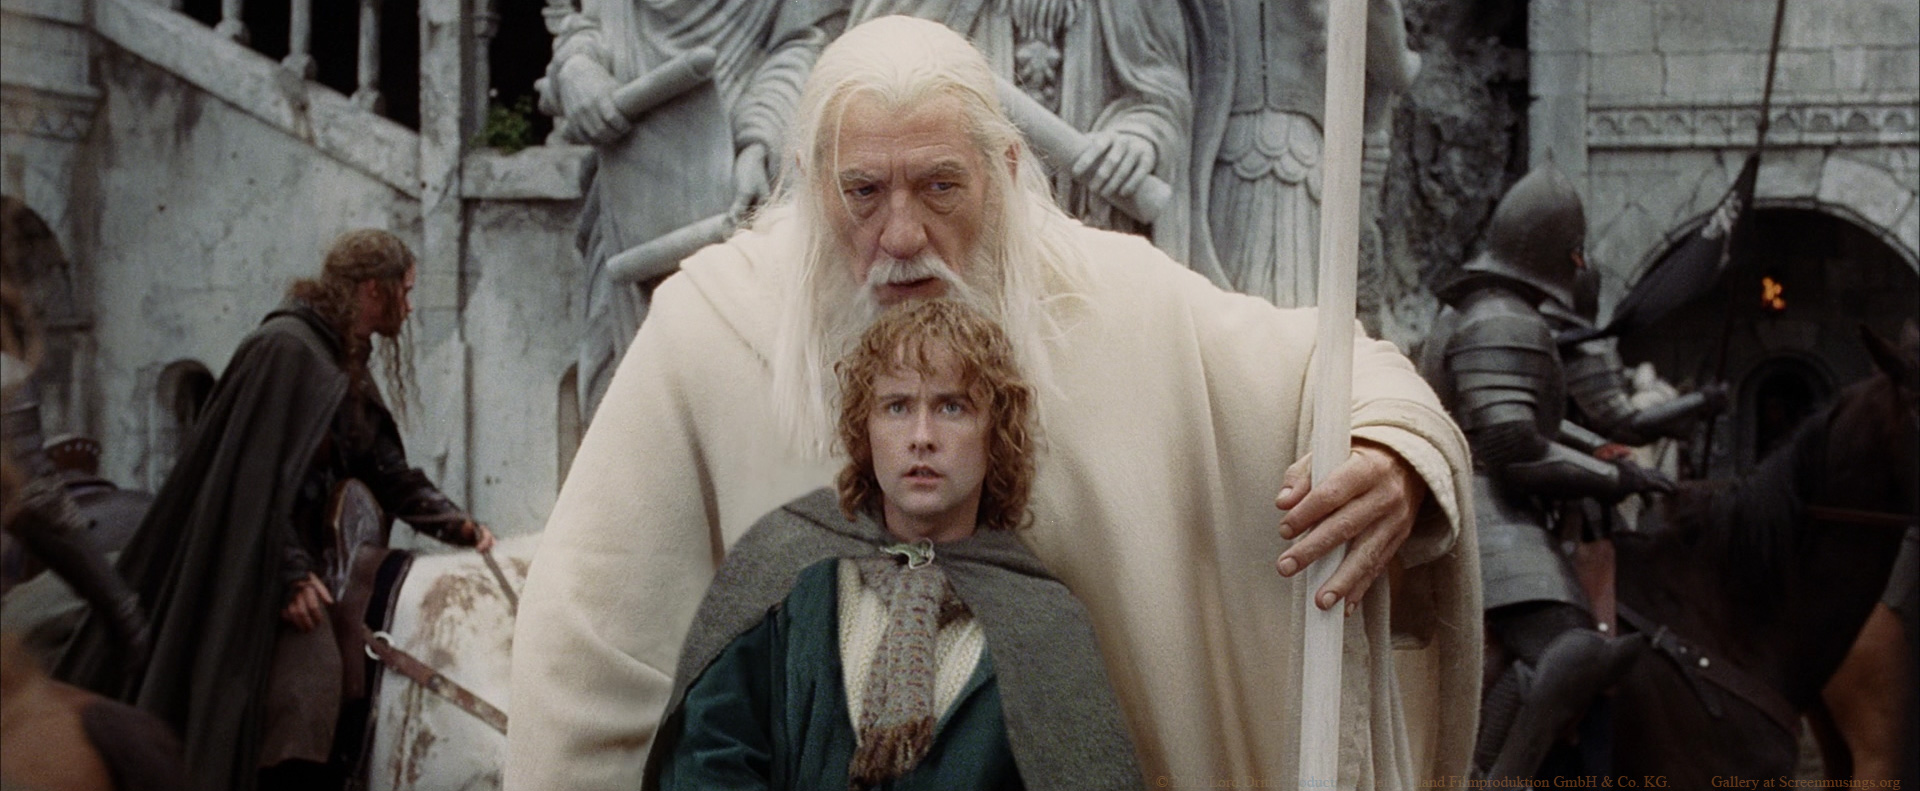 Billy Boyd in The Lord of the Rings: The Return of the King